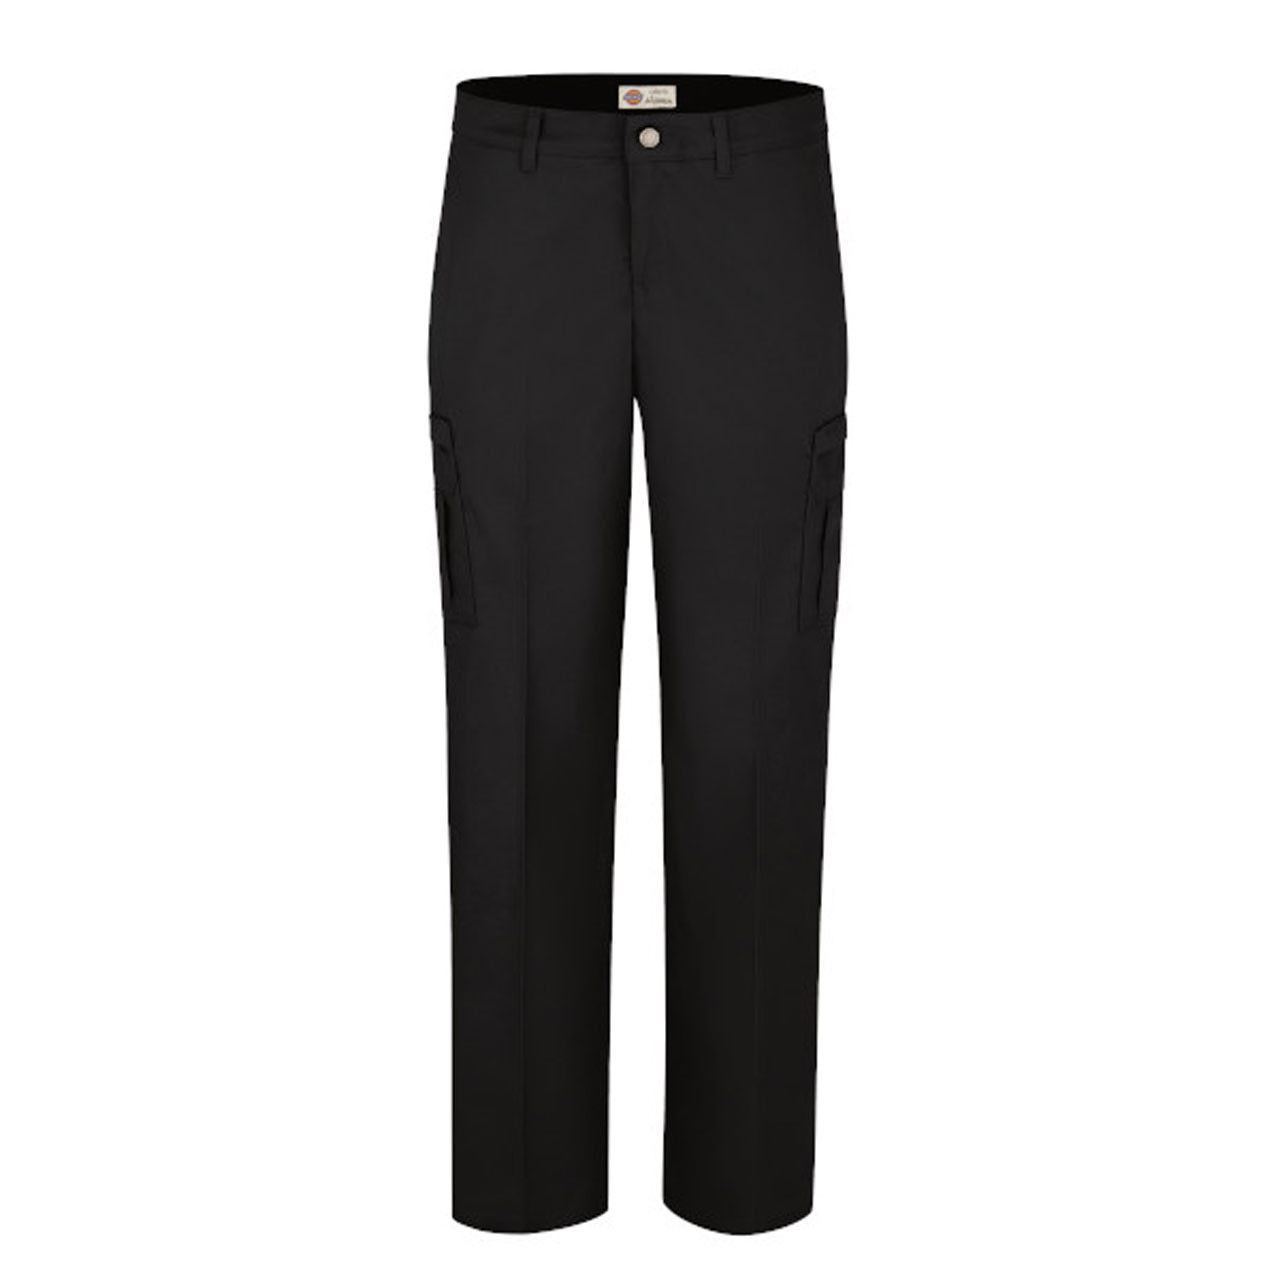 Where are the black Dickies pants for women shipped from?